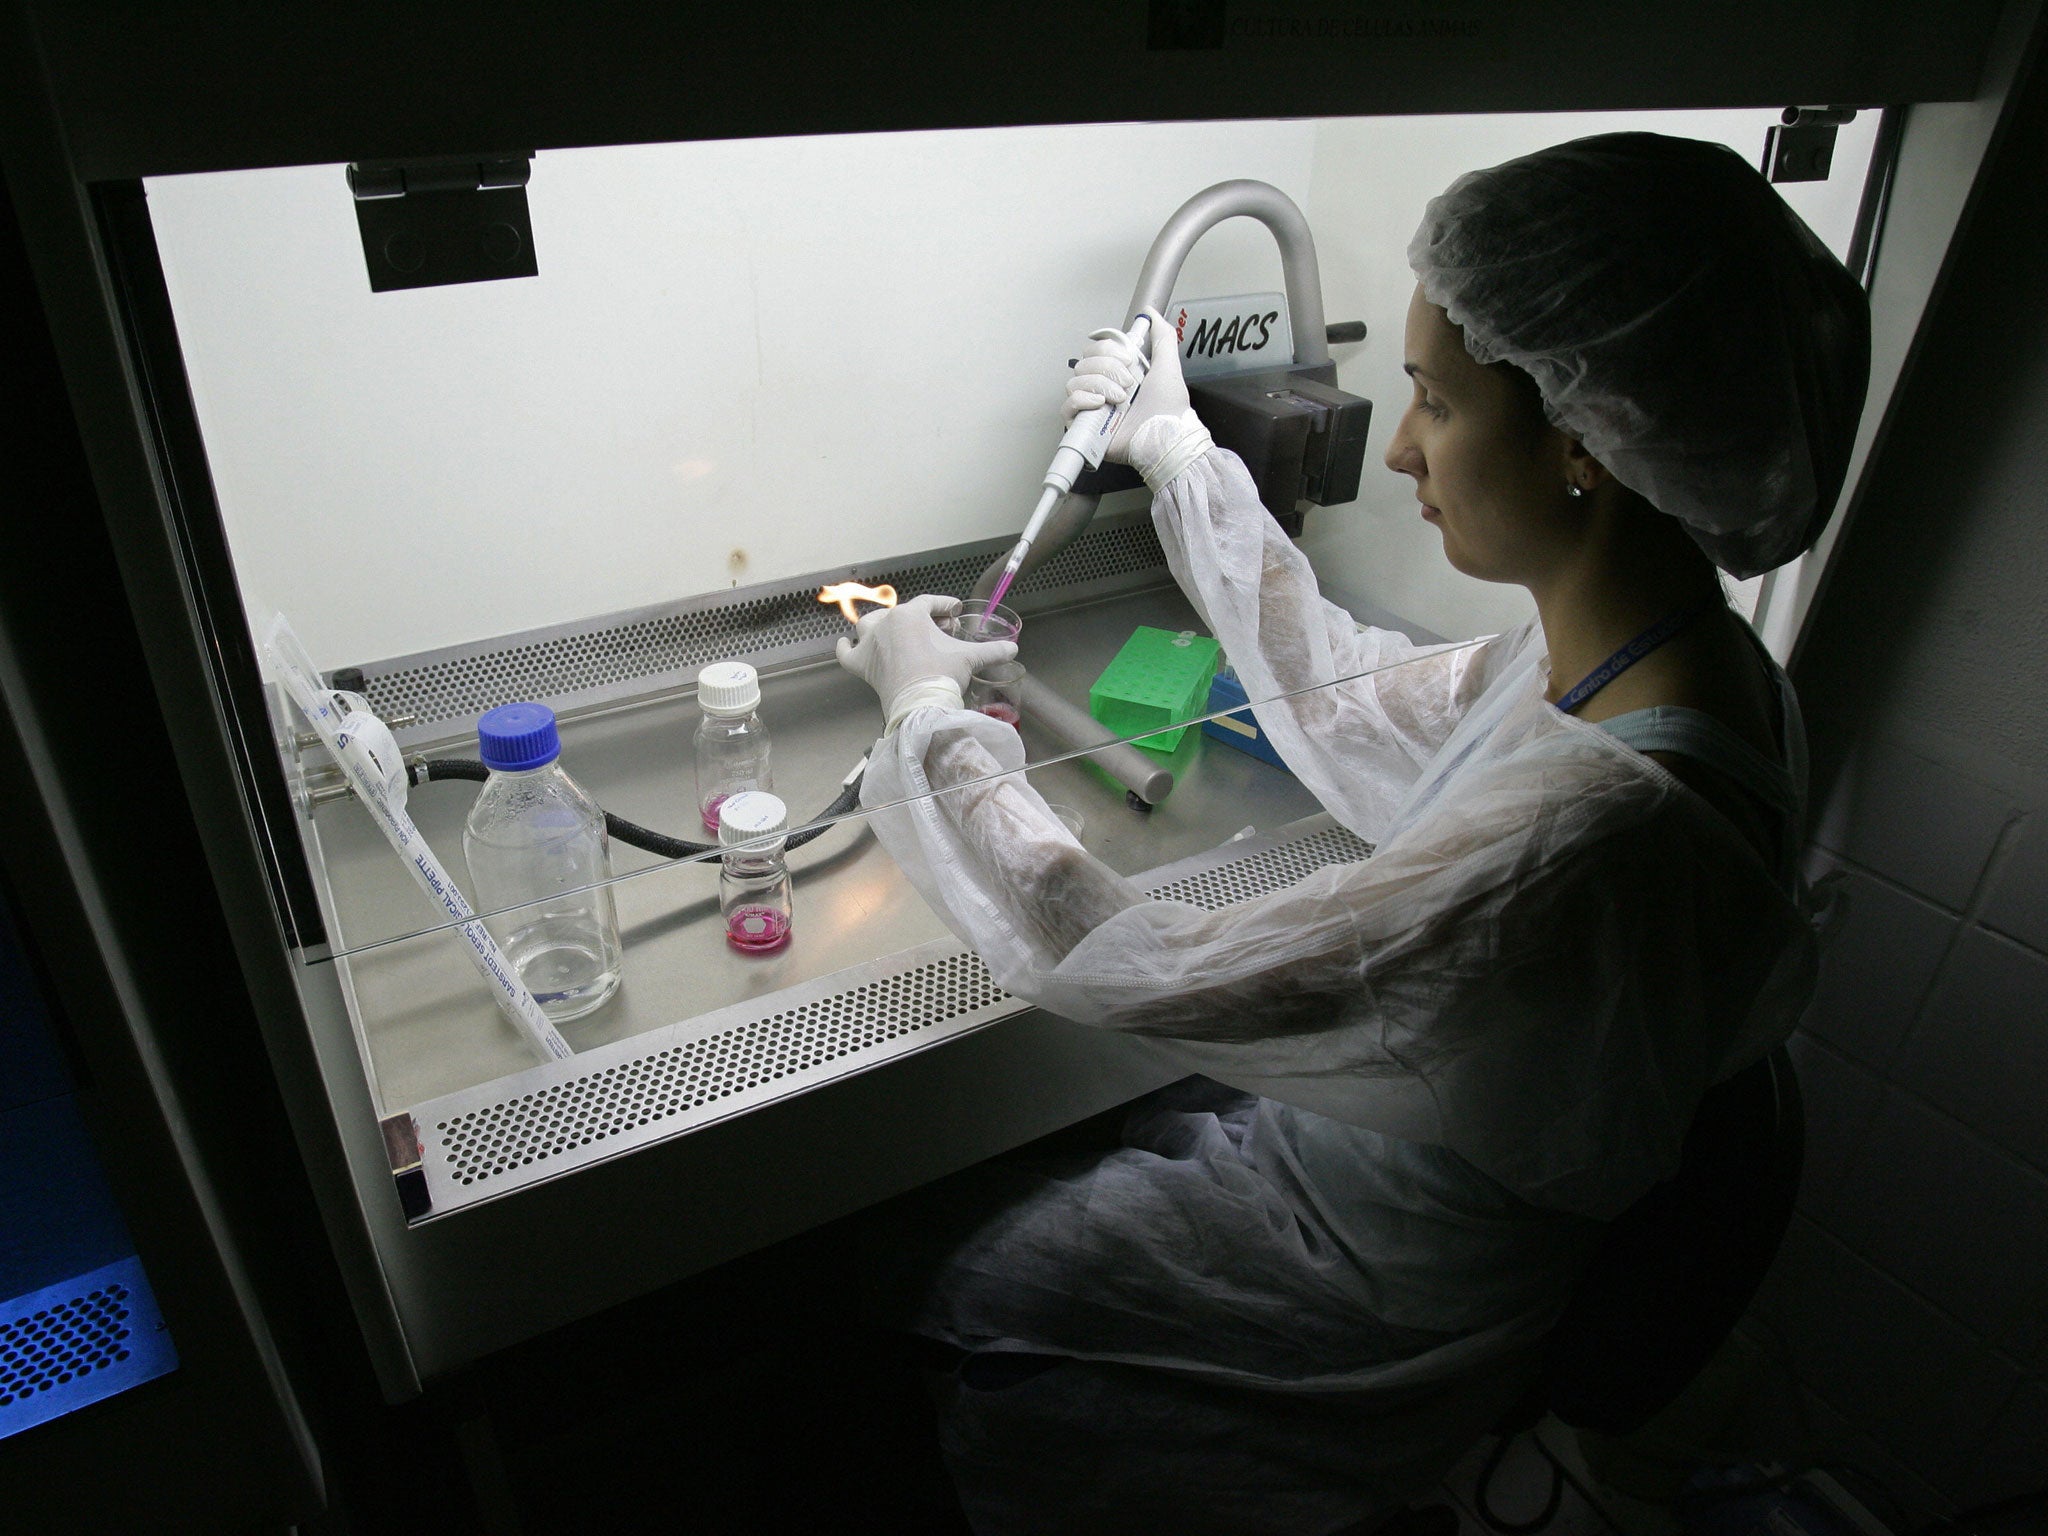 A scientific researcher works on an IVF treatment in a laboratory